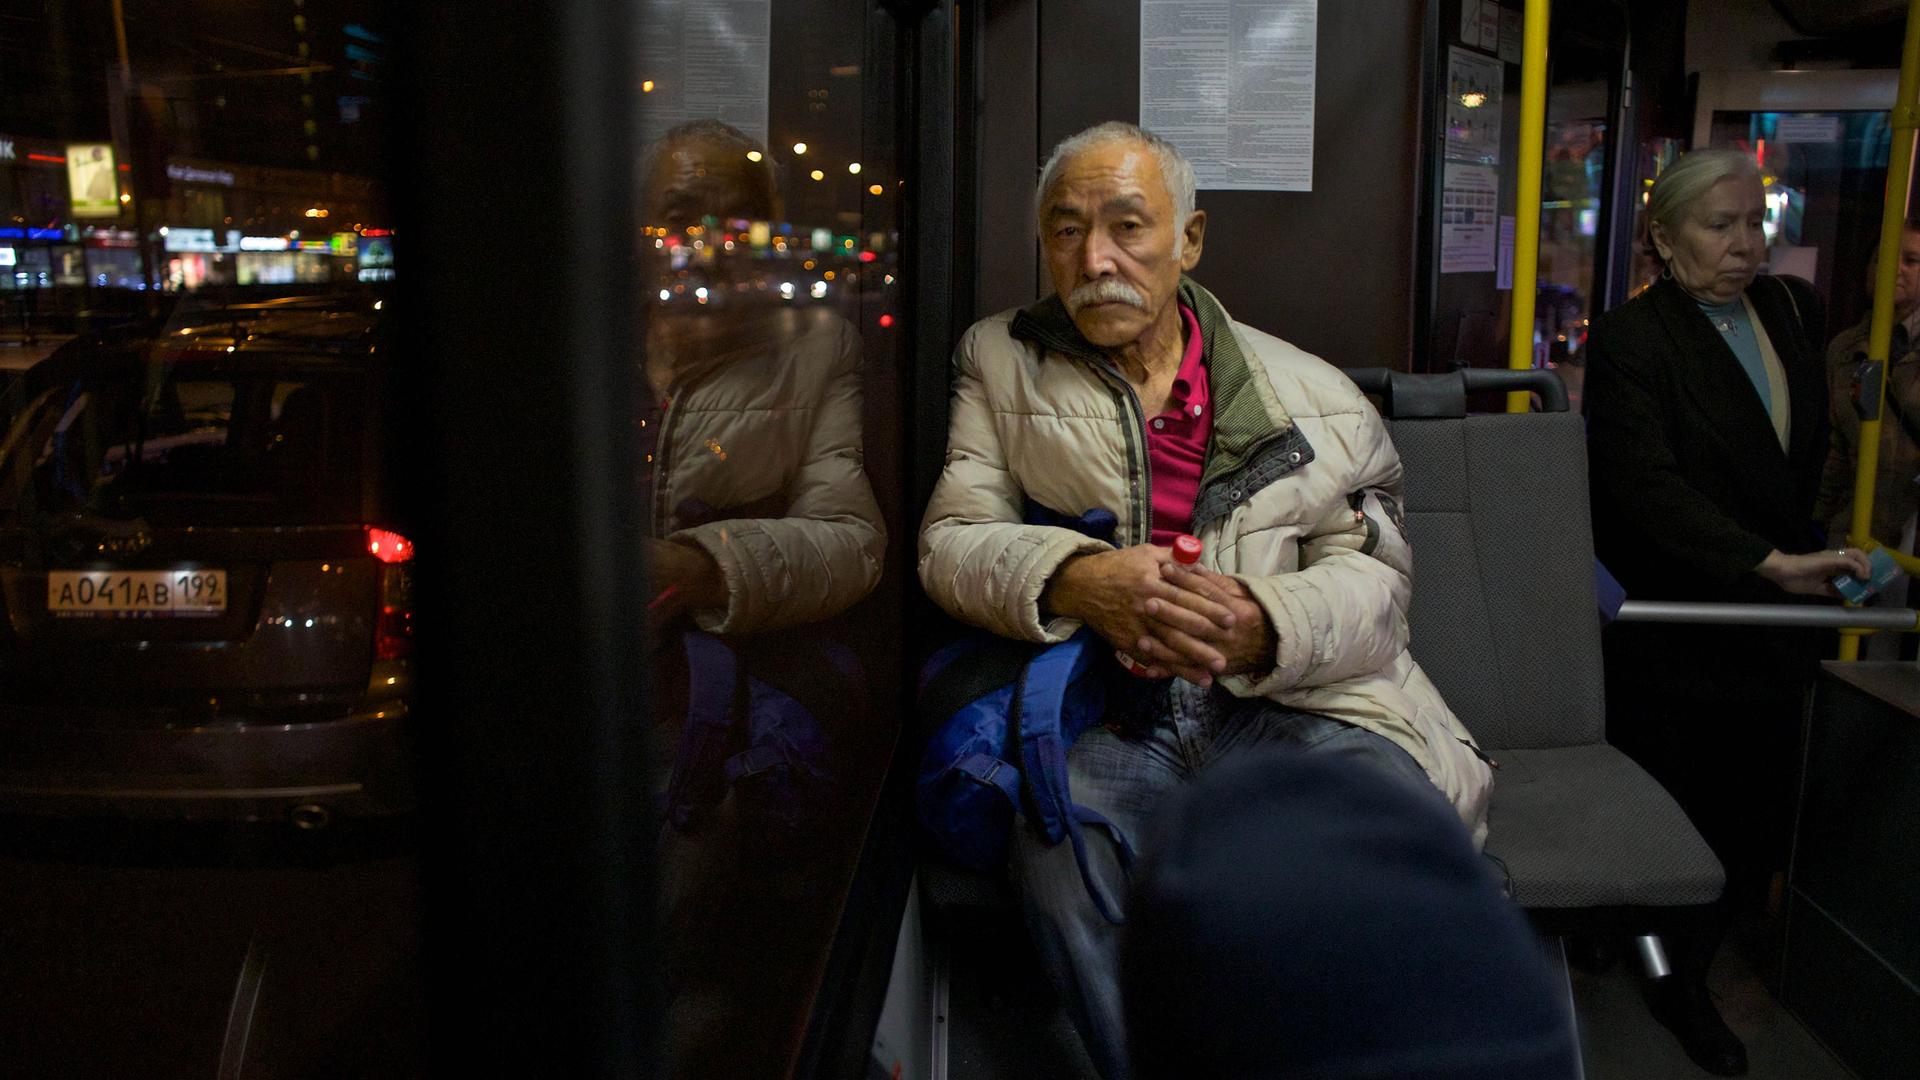 In this photo taken on Tuesday, Sept. 4, 2012, an elderly man sits inside a bus in the station of Moscow, Russia. More and more migrants from the Central Asia are coming come to Moscow in search of work.